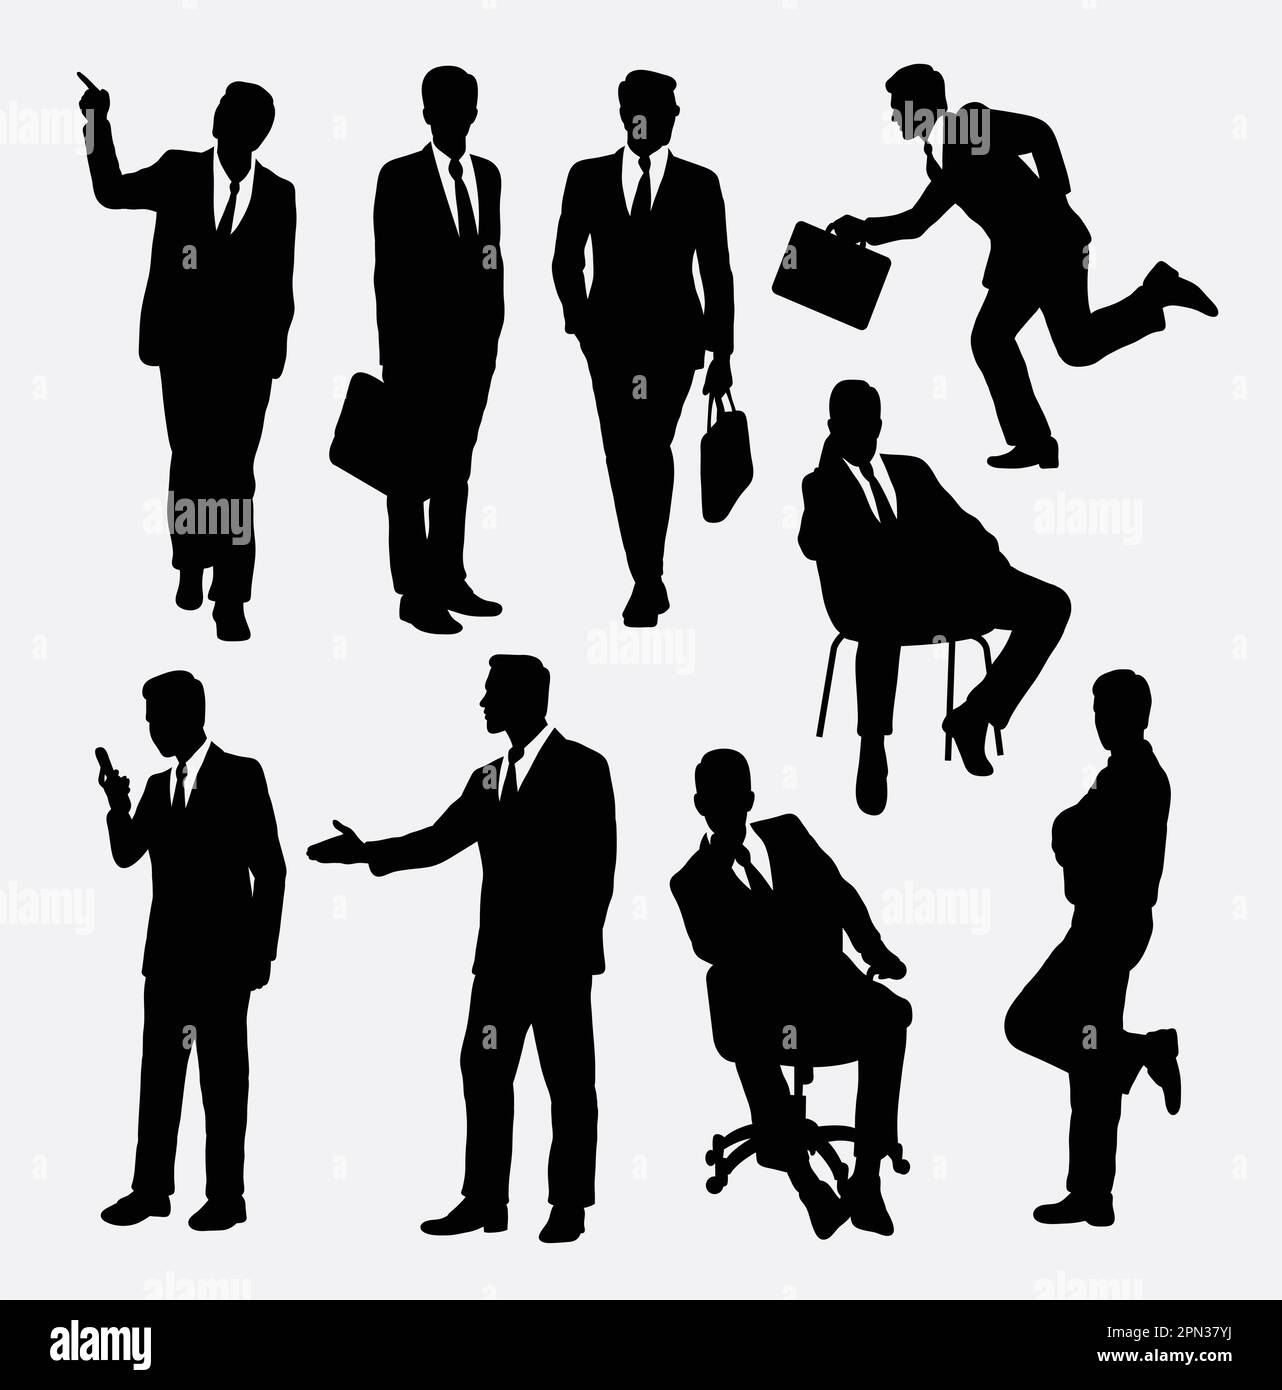 Businessman concept silhouettes. Good use for symbol, web icon, logo, mascot, or any design you want. Easy to use. Stock Vector